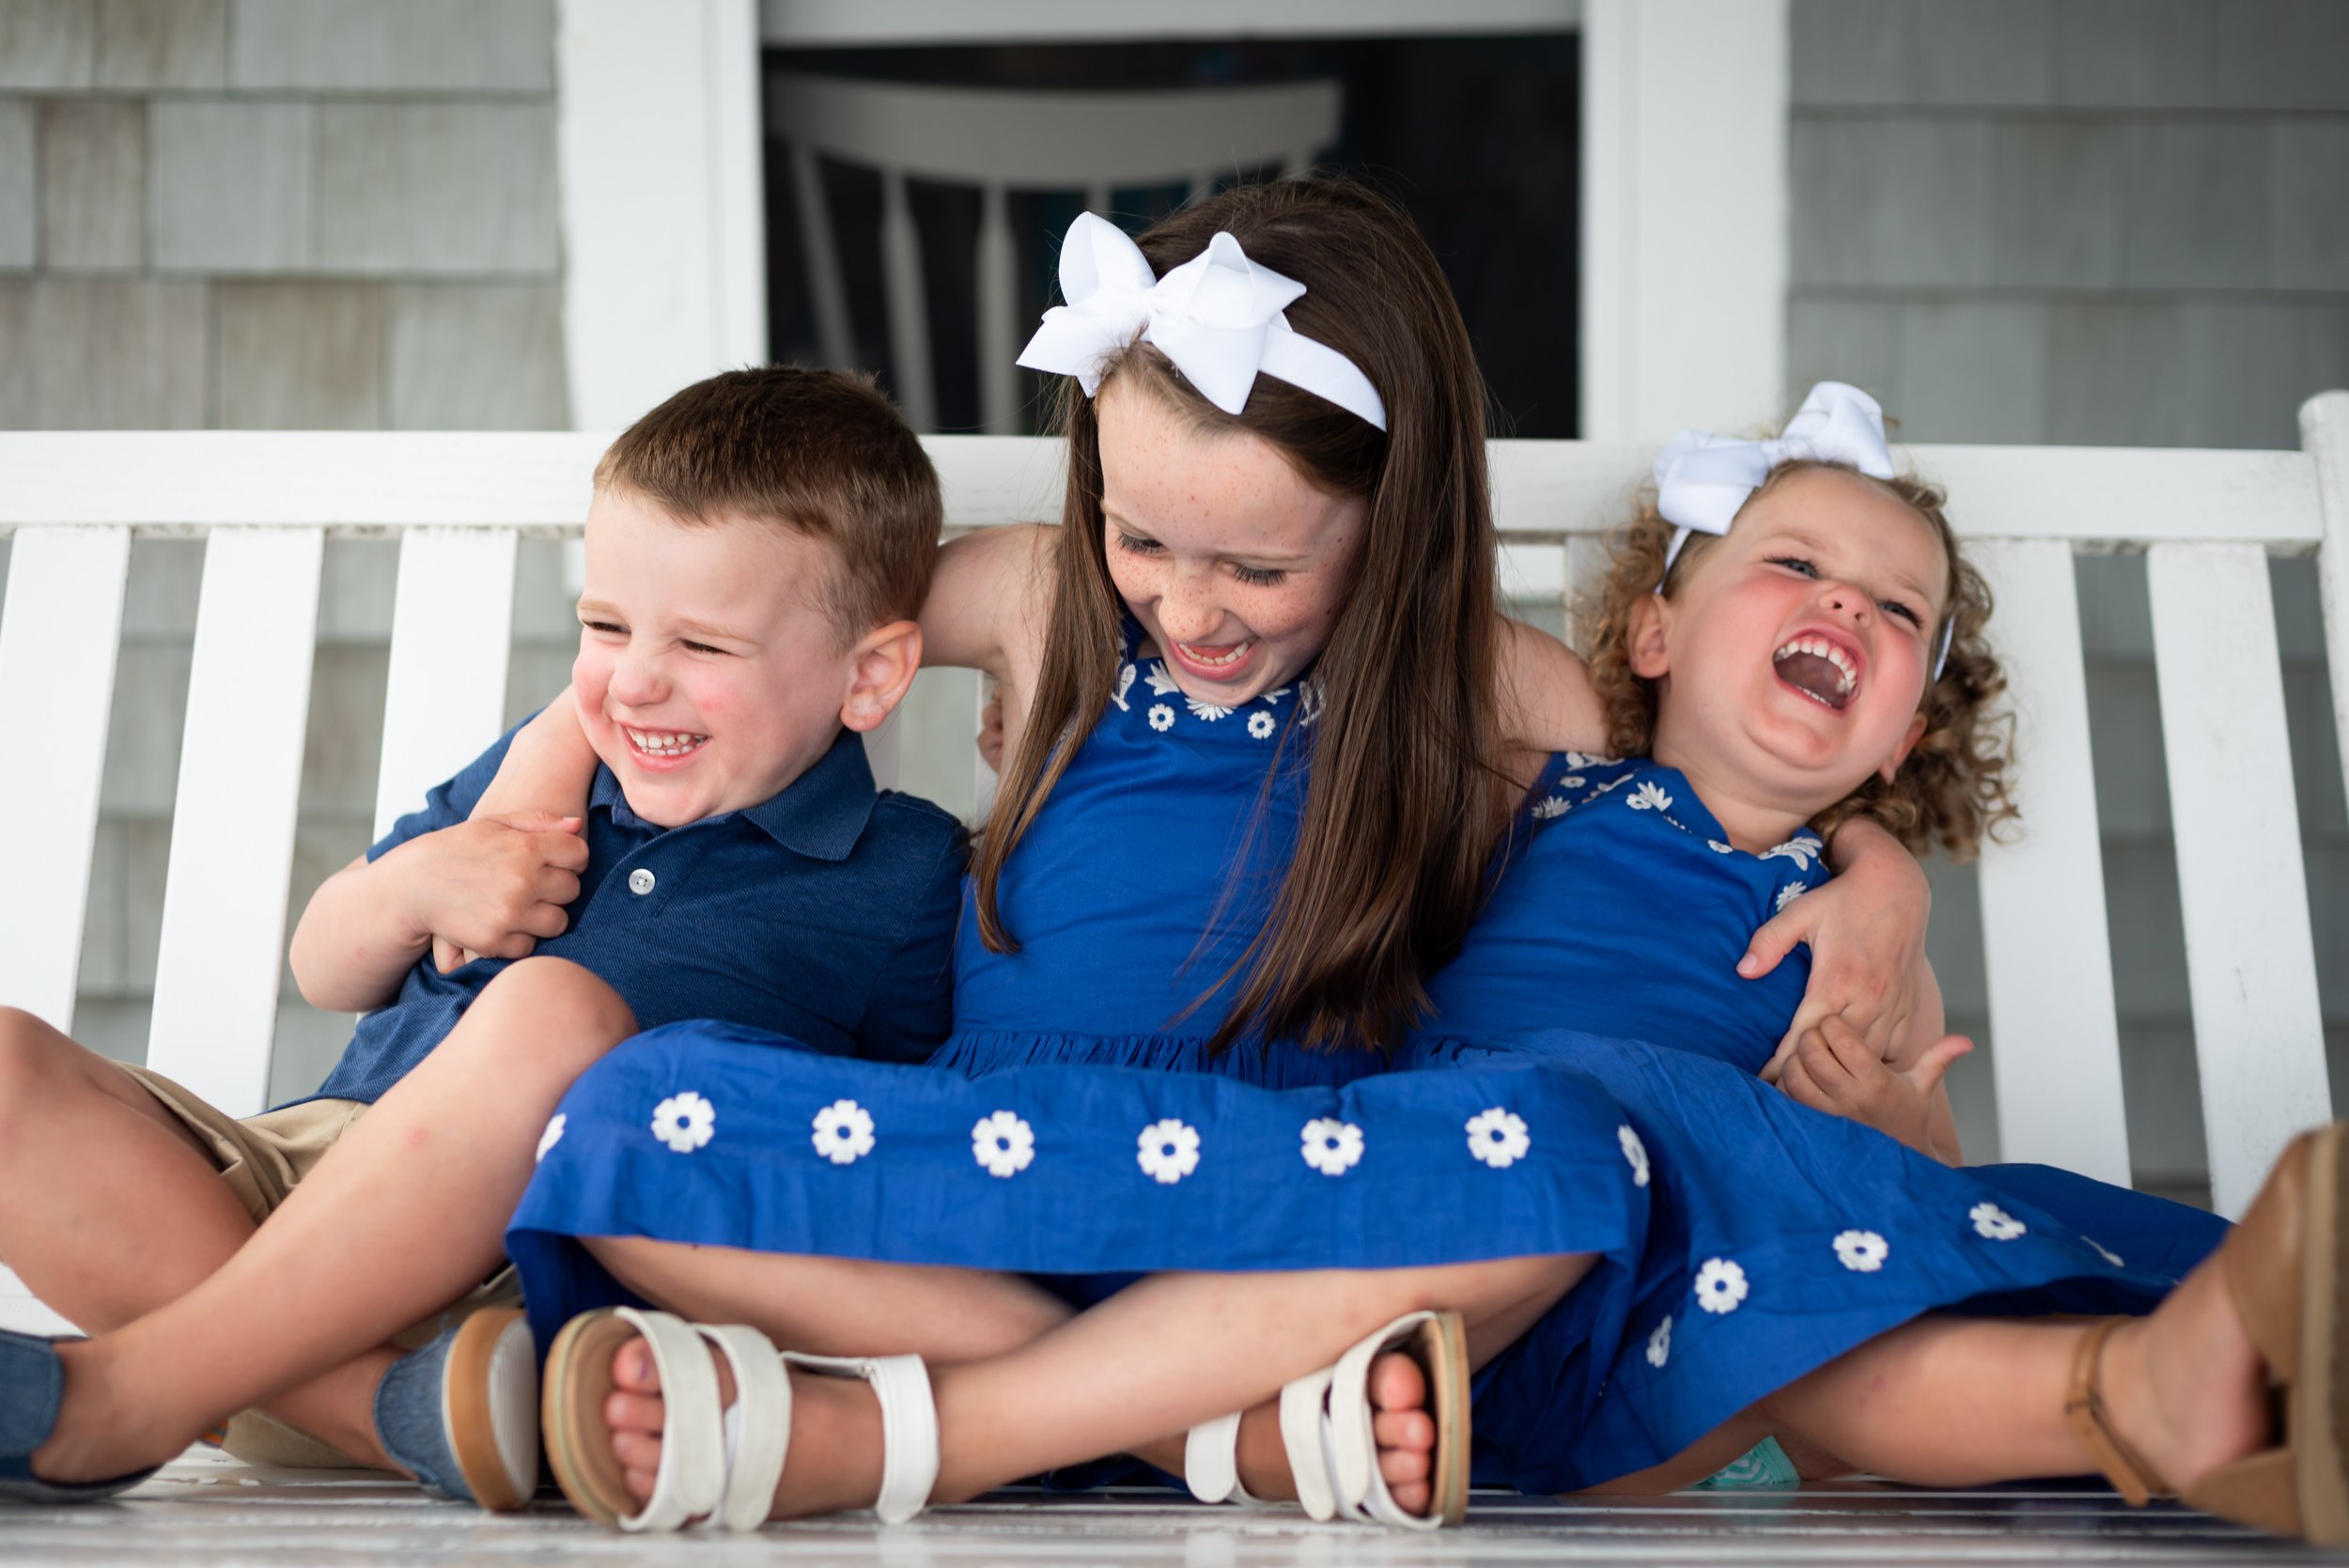 lindsay murphy photography | portland maine family photographer | siblings on porch swing chebeague island.jpg